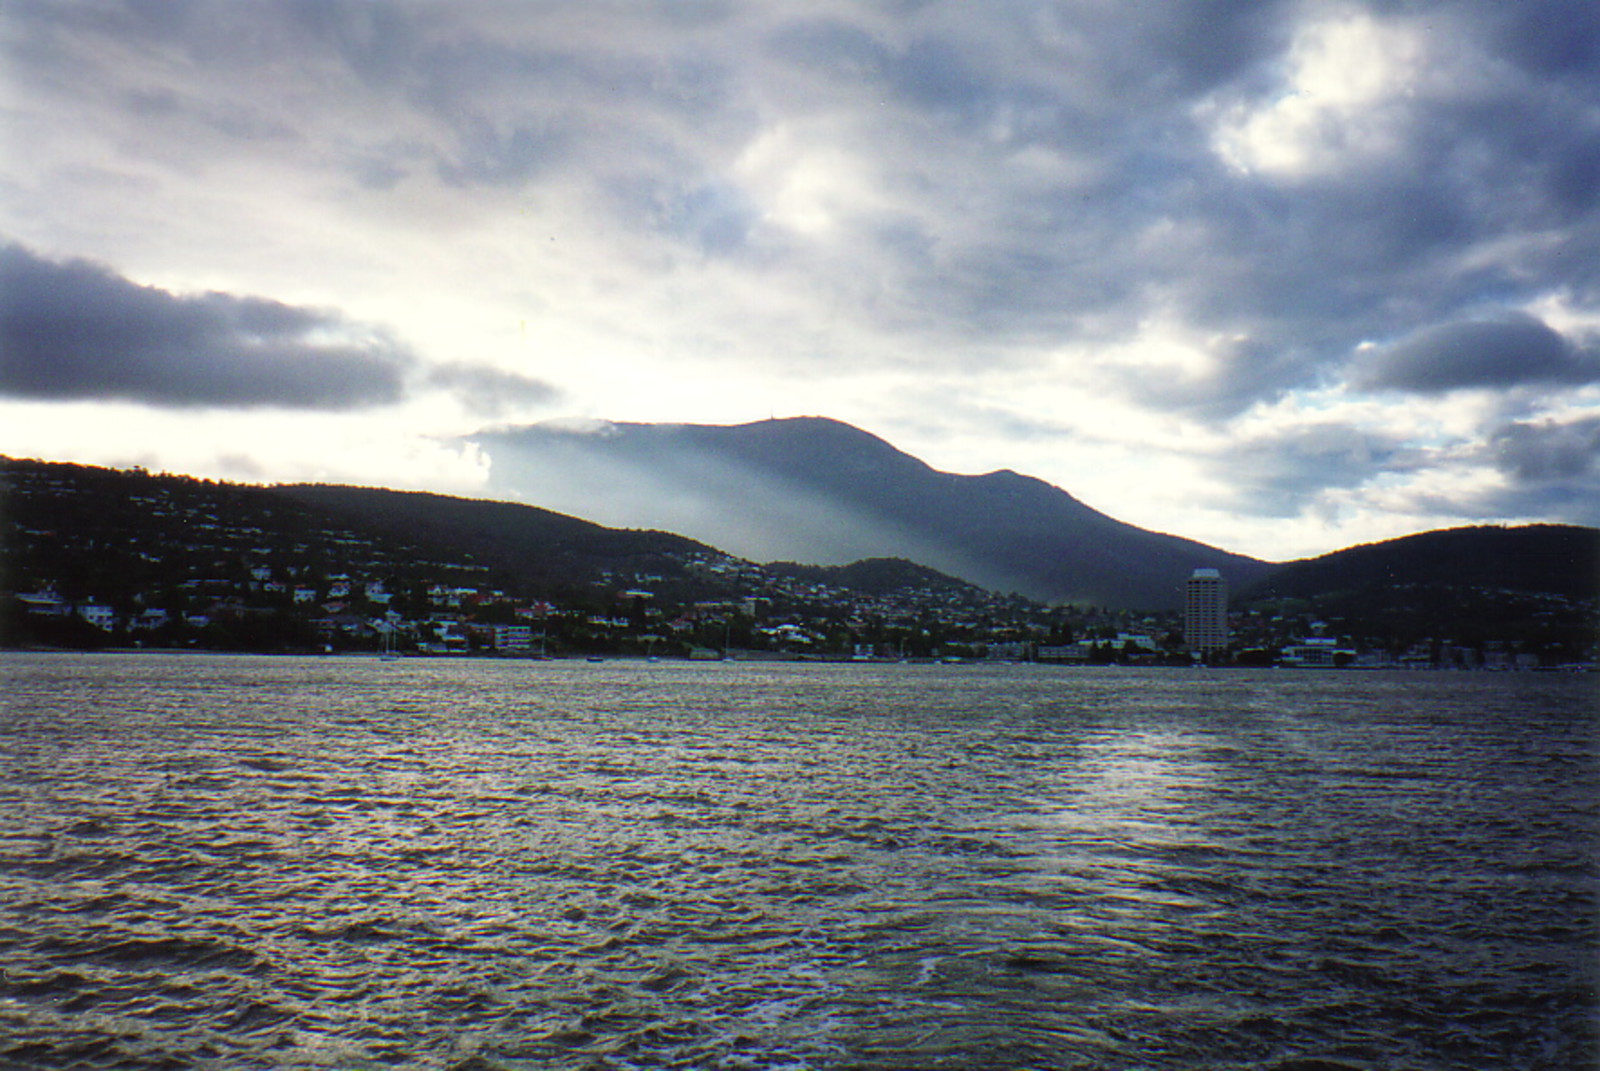 A view of Hobart from the bay